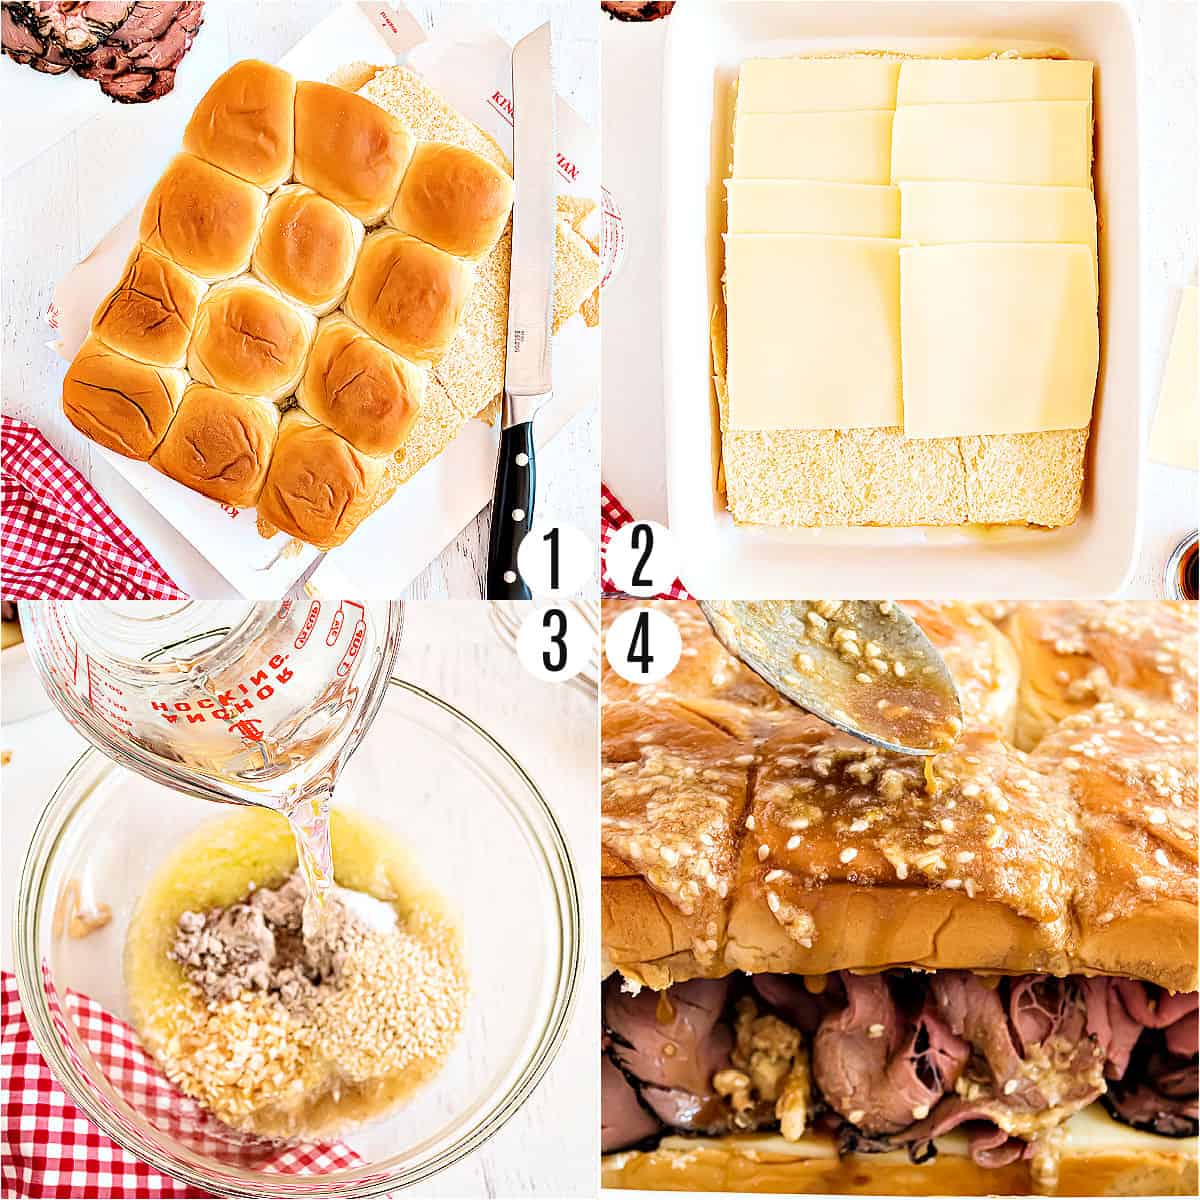 Step by step photos showing how to make french dip sliders.